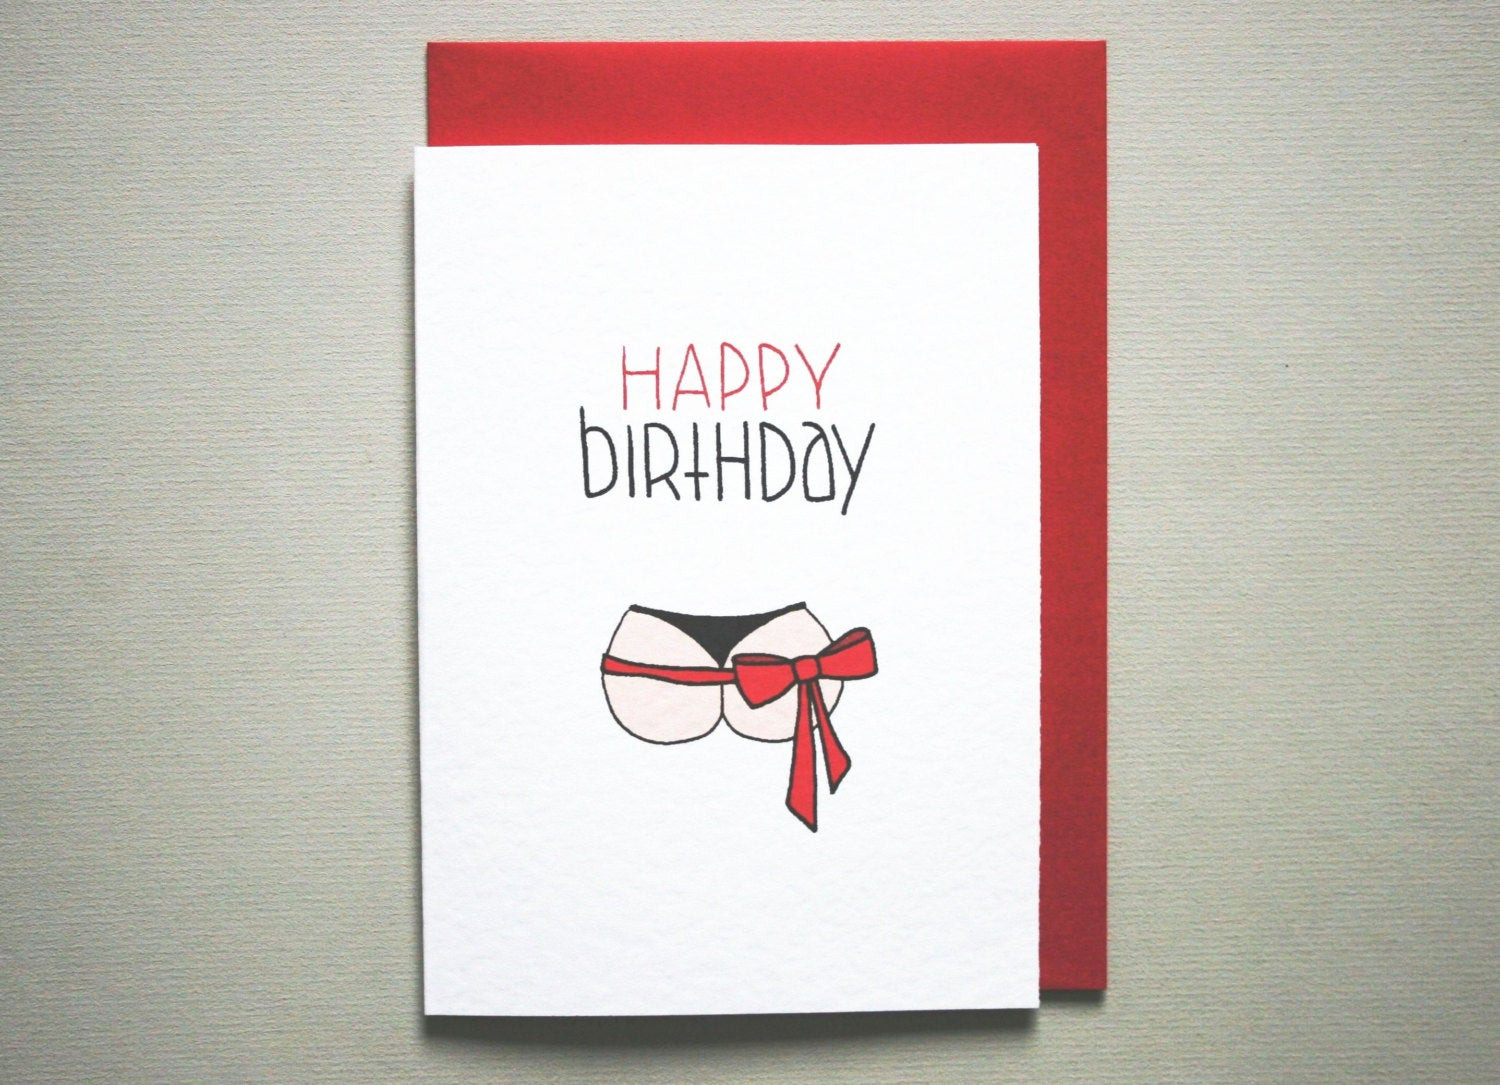 Happy Birthday Cards For Him Funny
 funny happy birthday bum card for him naughty birthday card